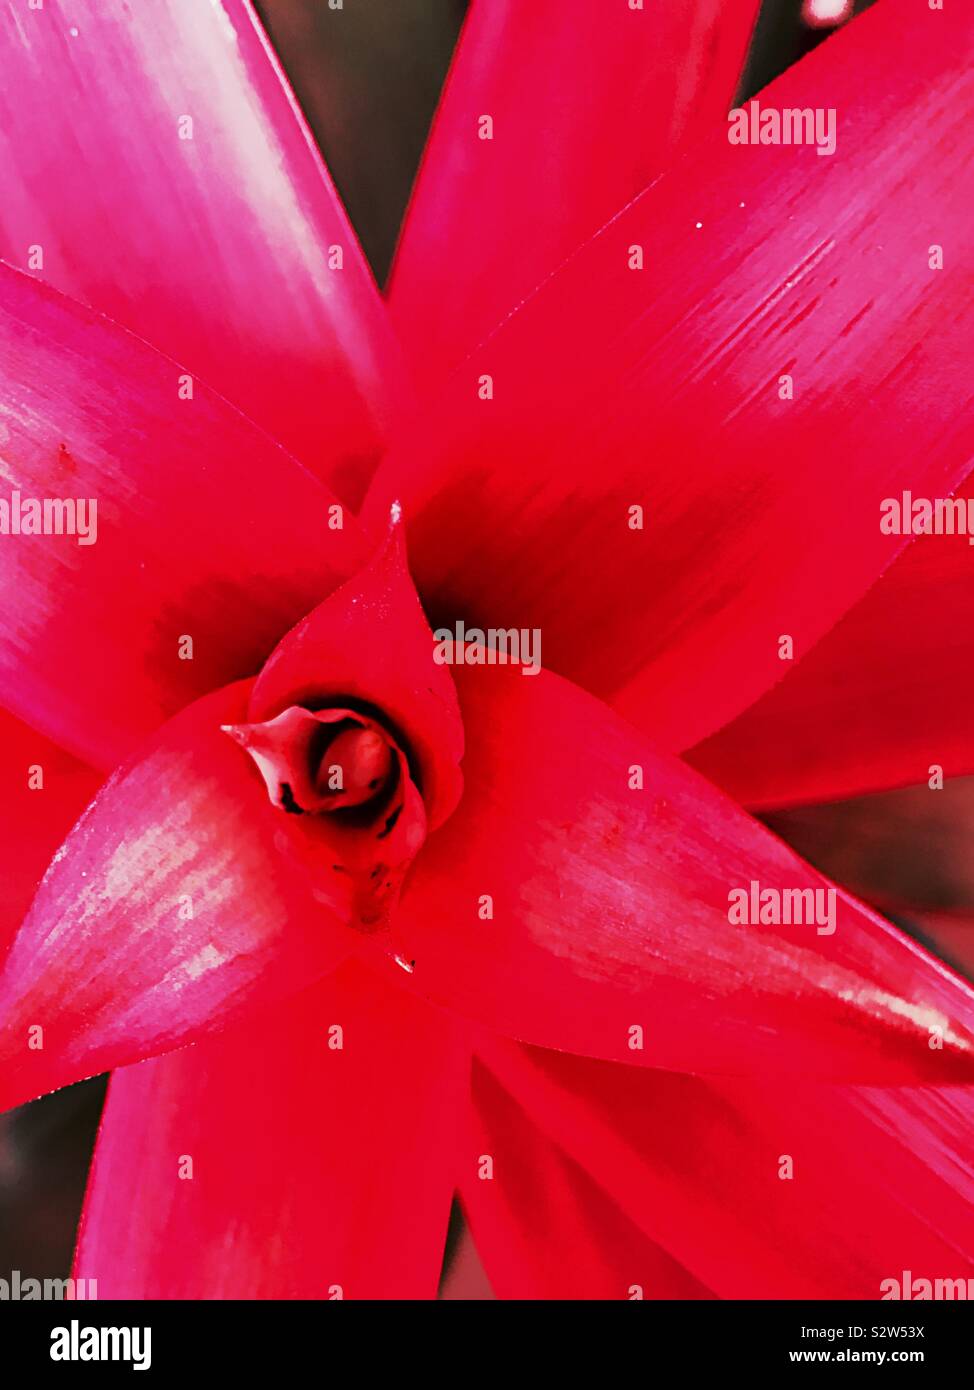 Red bromeliad flower detail Stock Photo